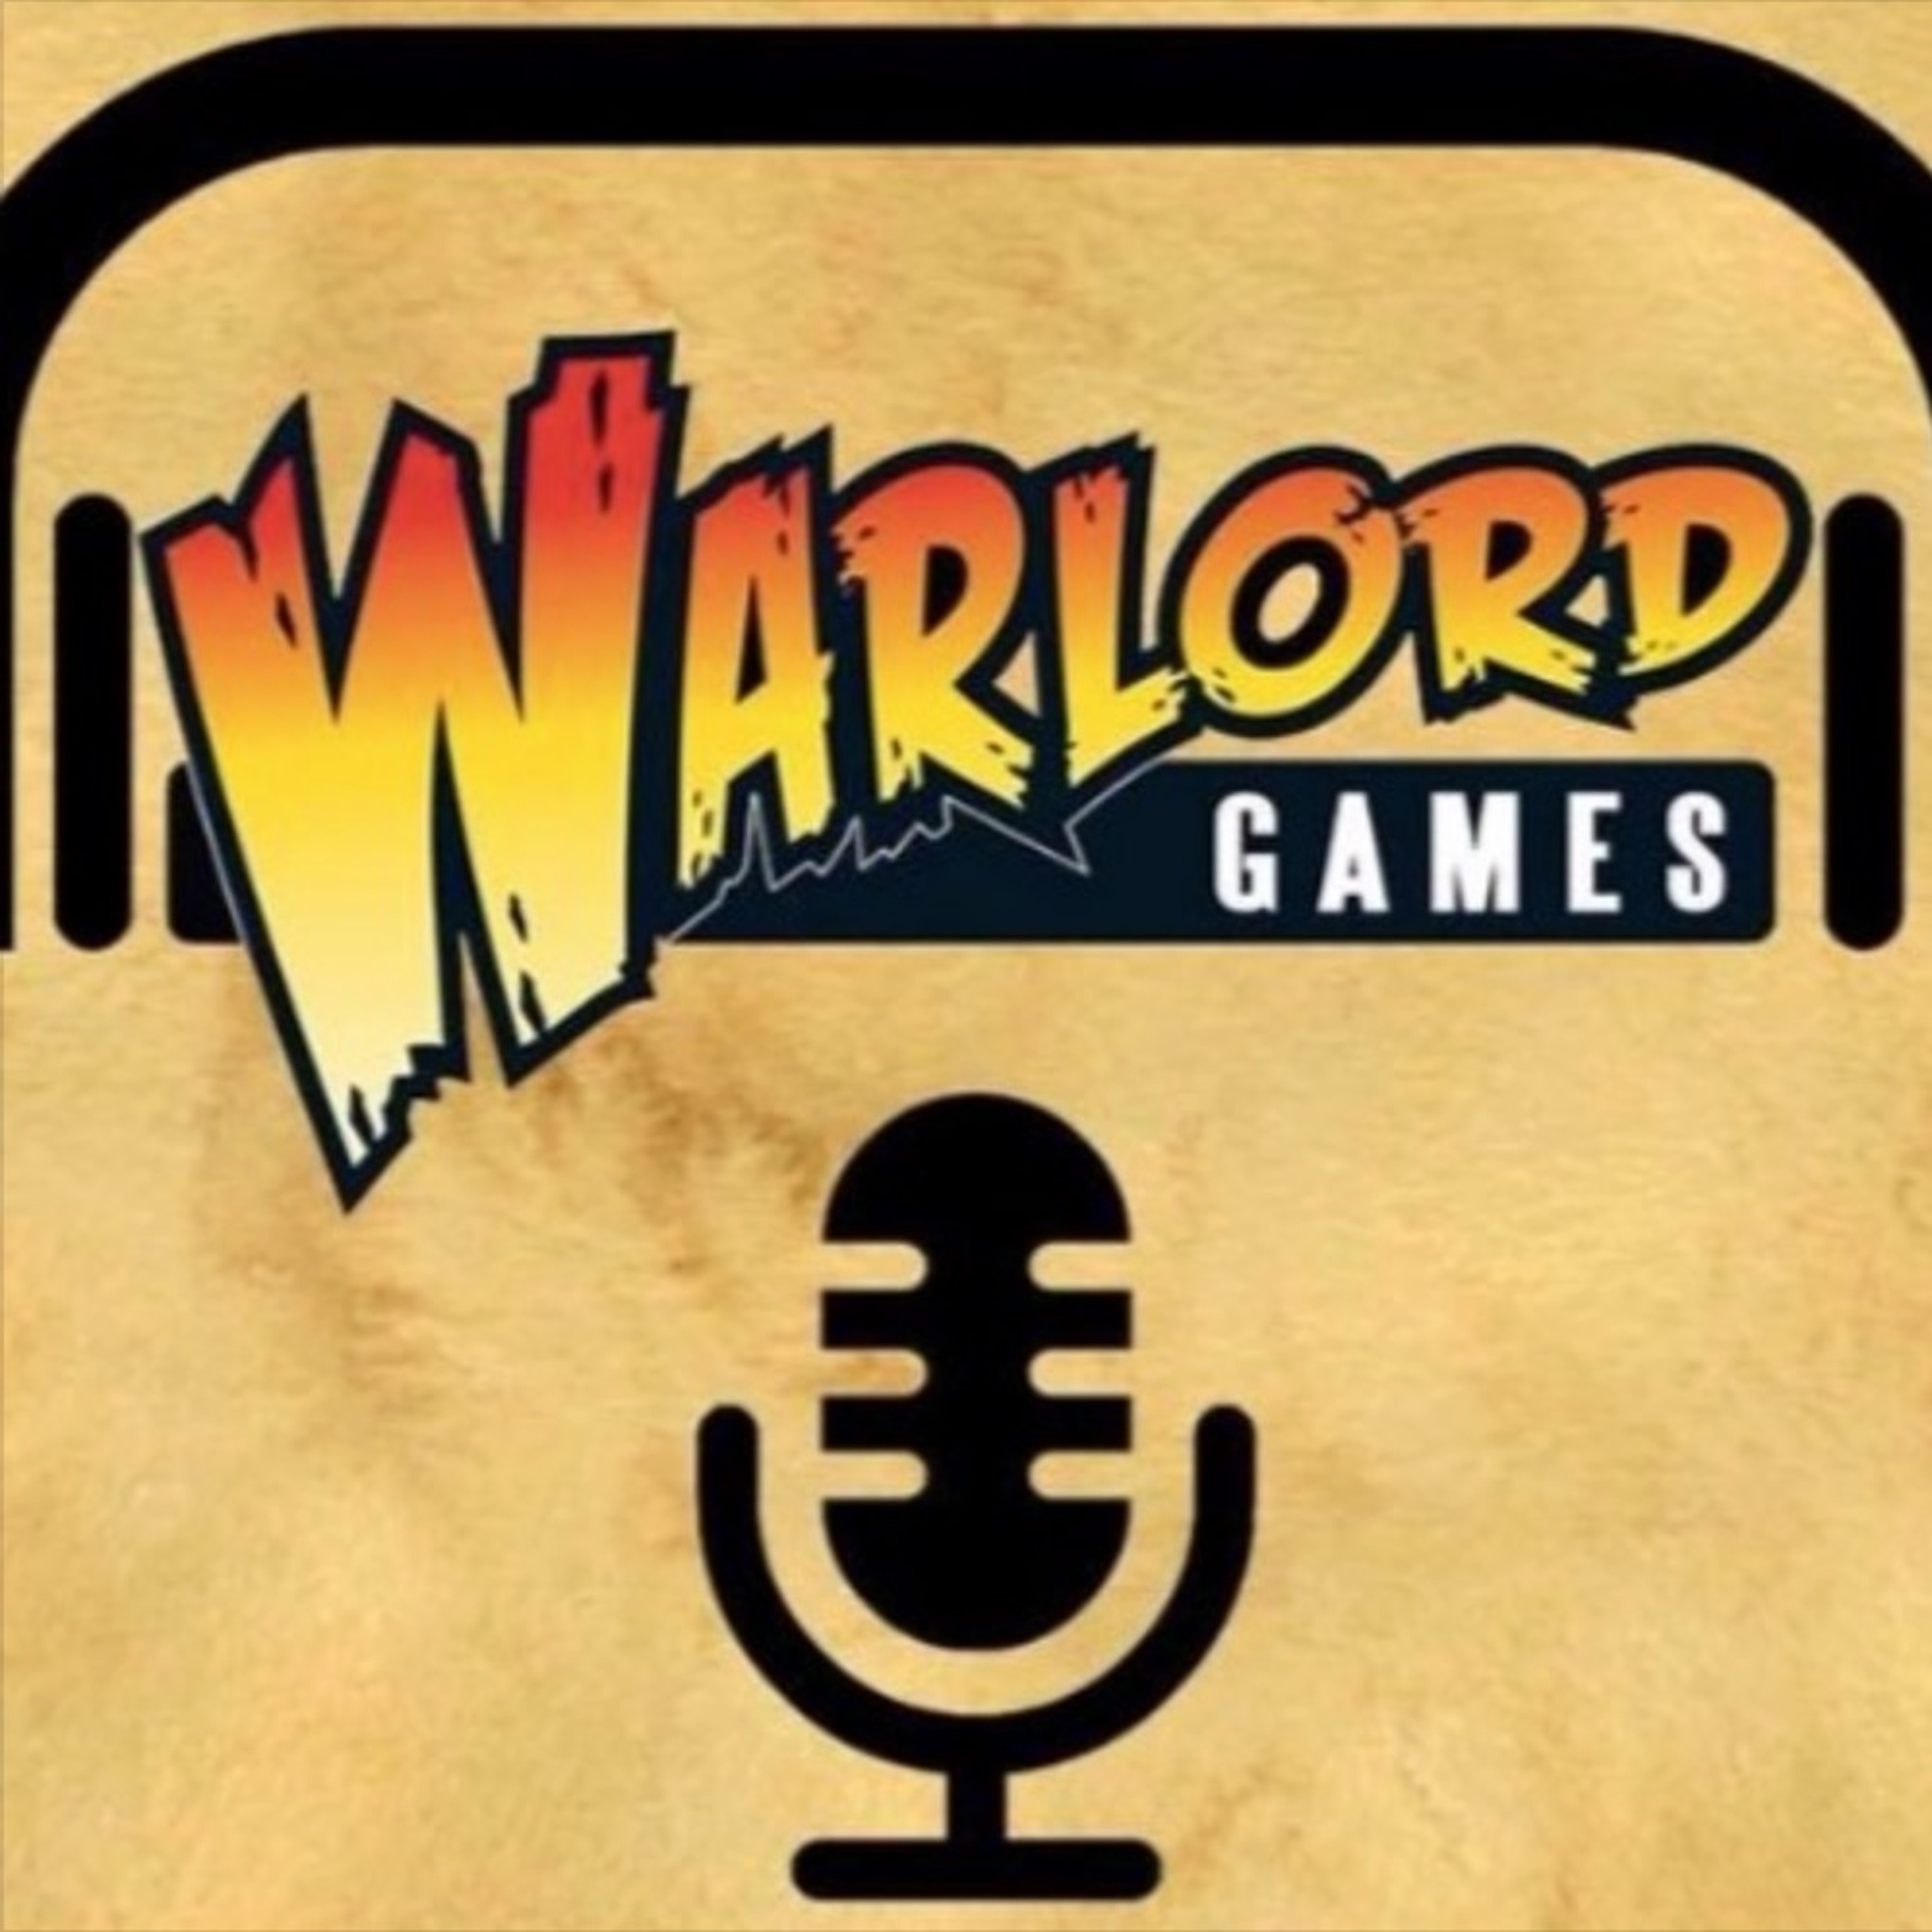 The Official Warlord Games Podcast - Episode 10 - Warlords Of Erehwon